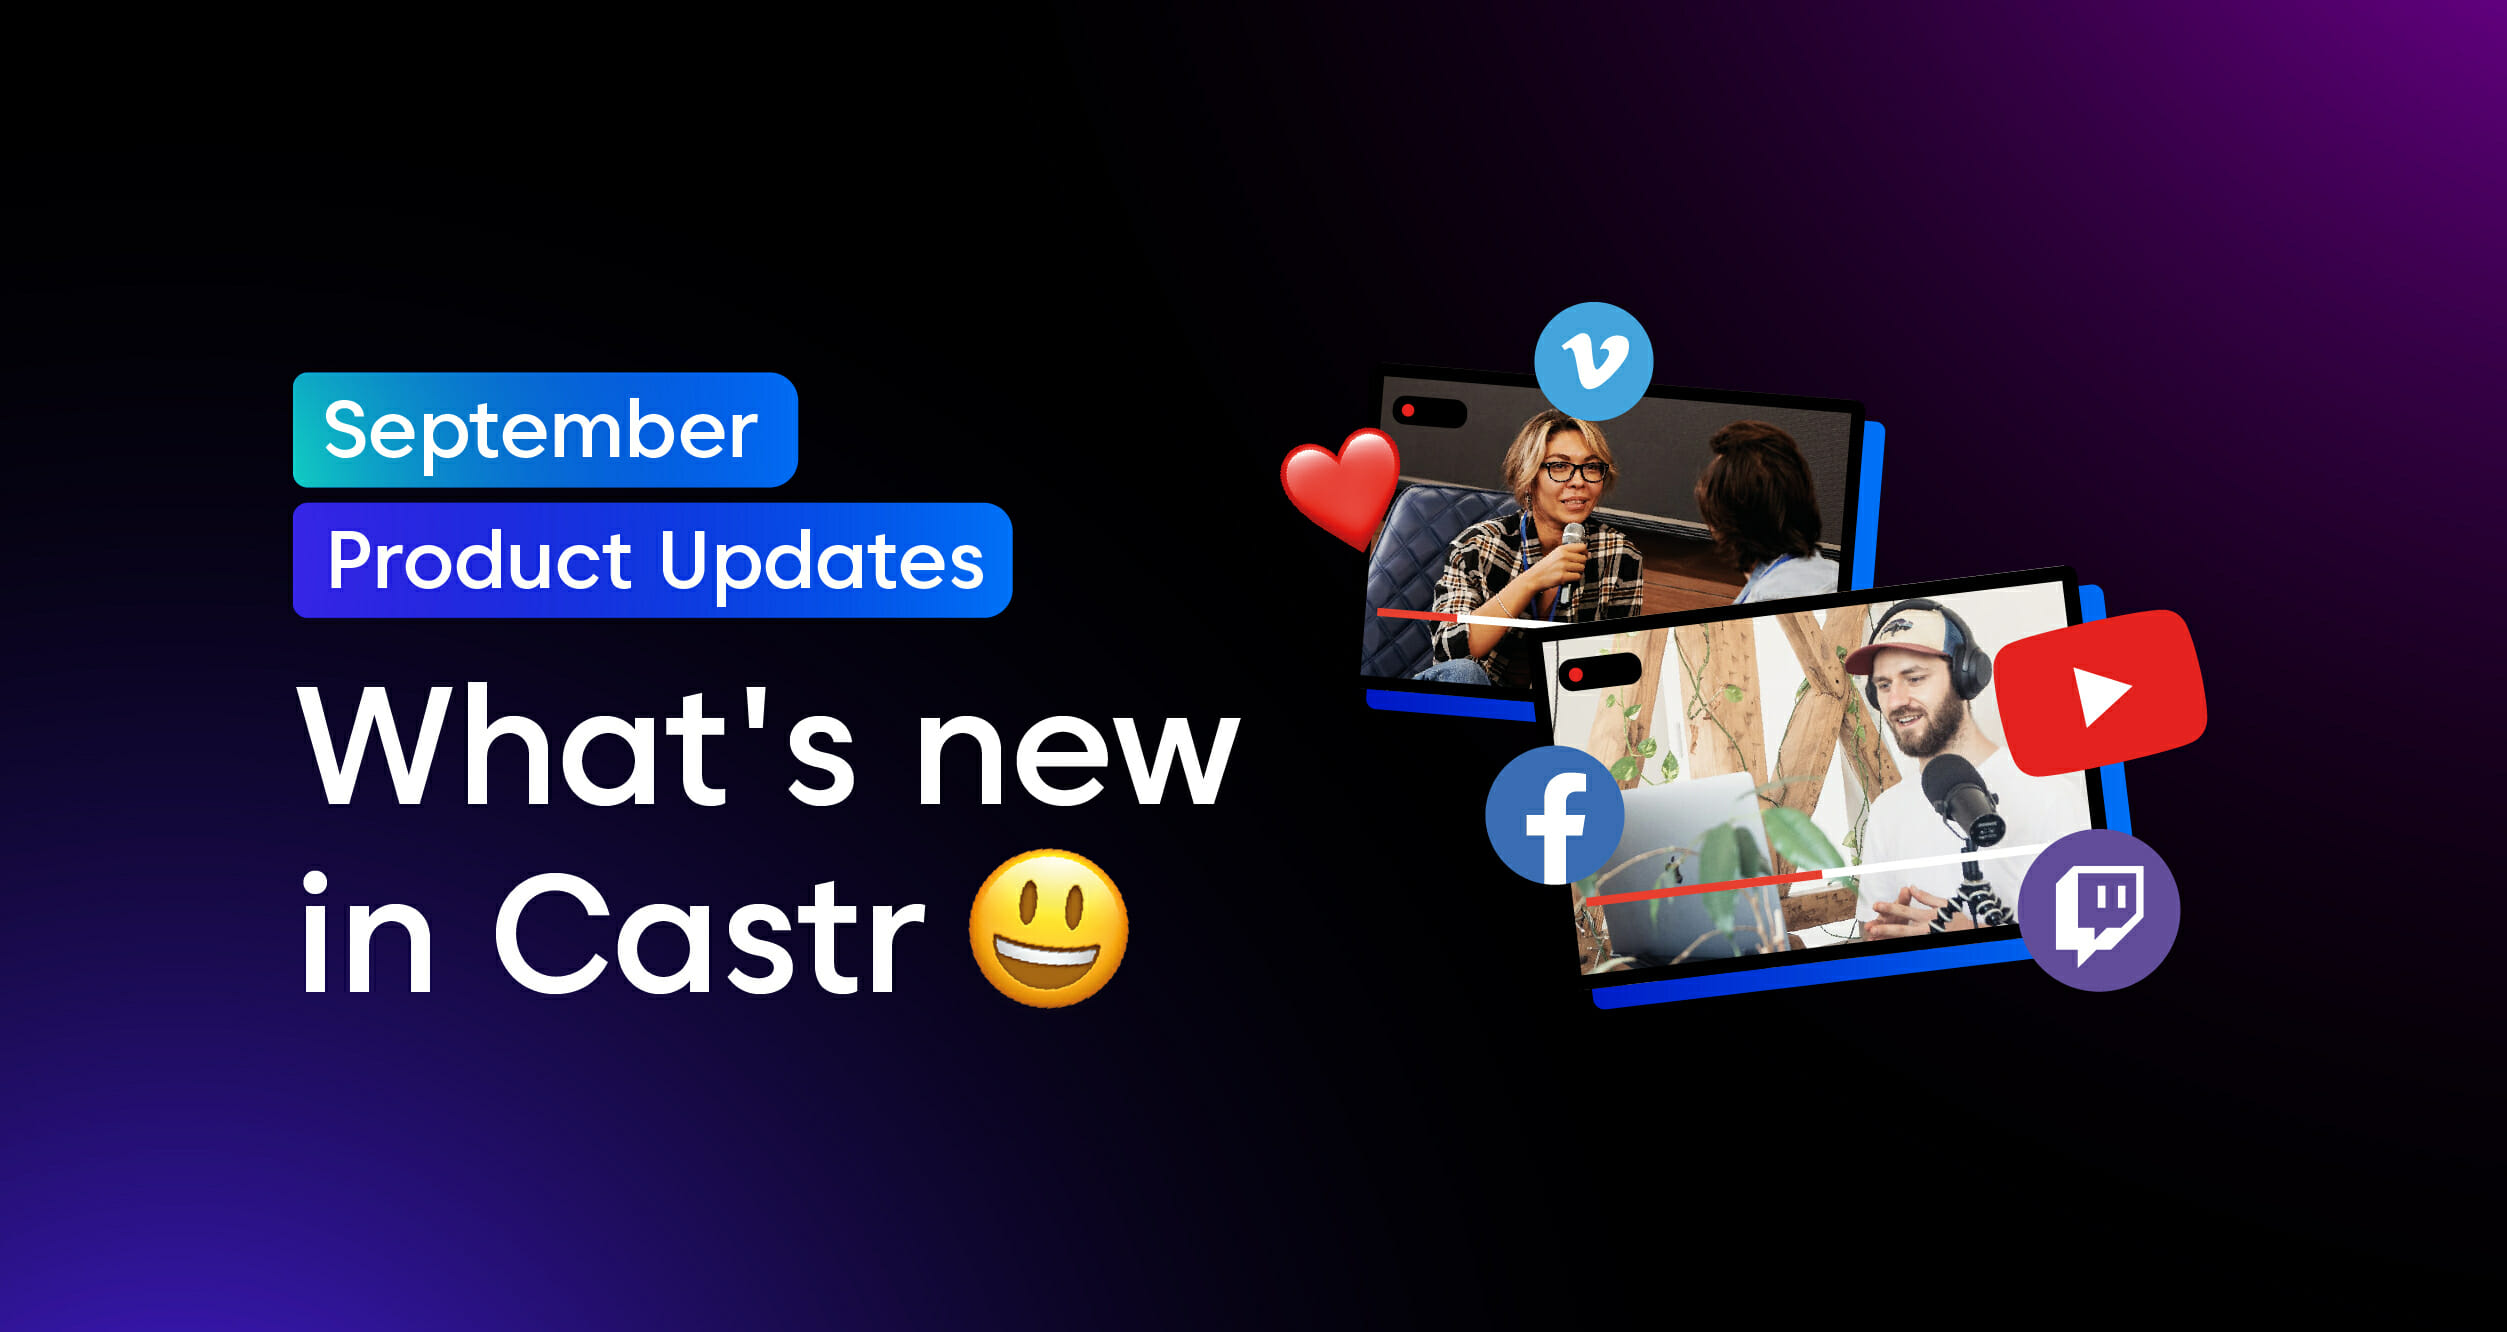 What’s New in Castr? Check Out These Exciting Product Updates Coming This September!